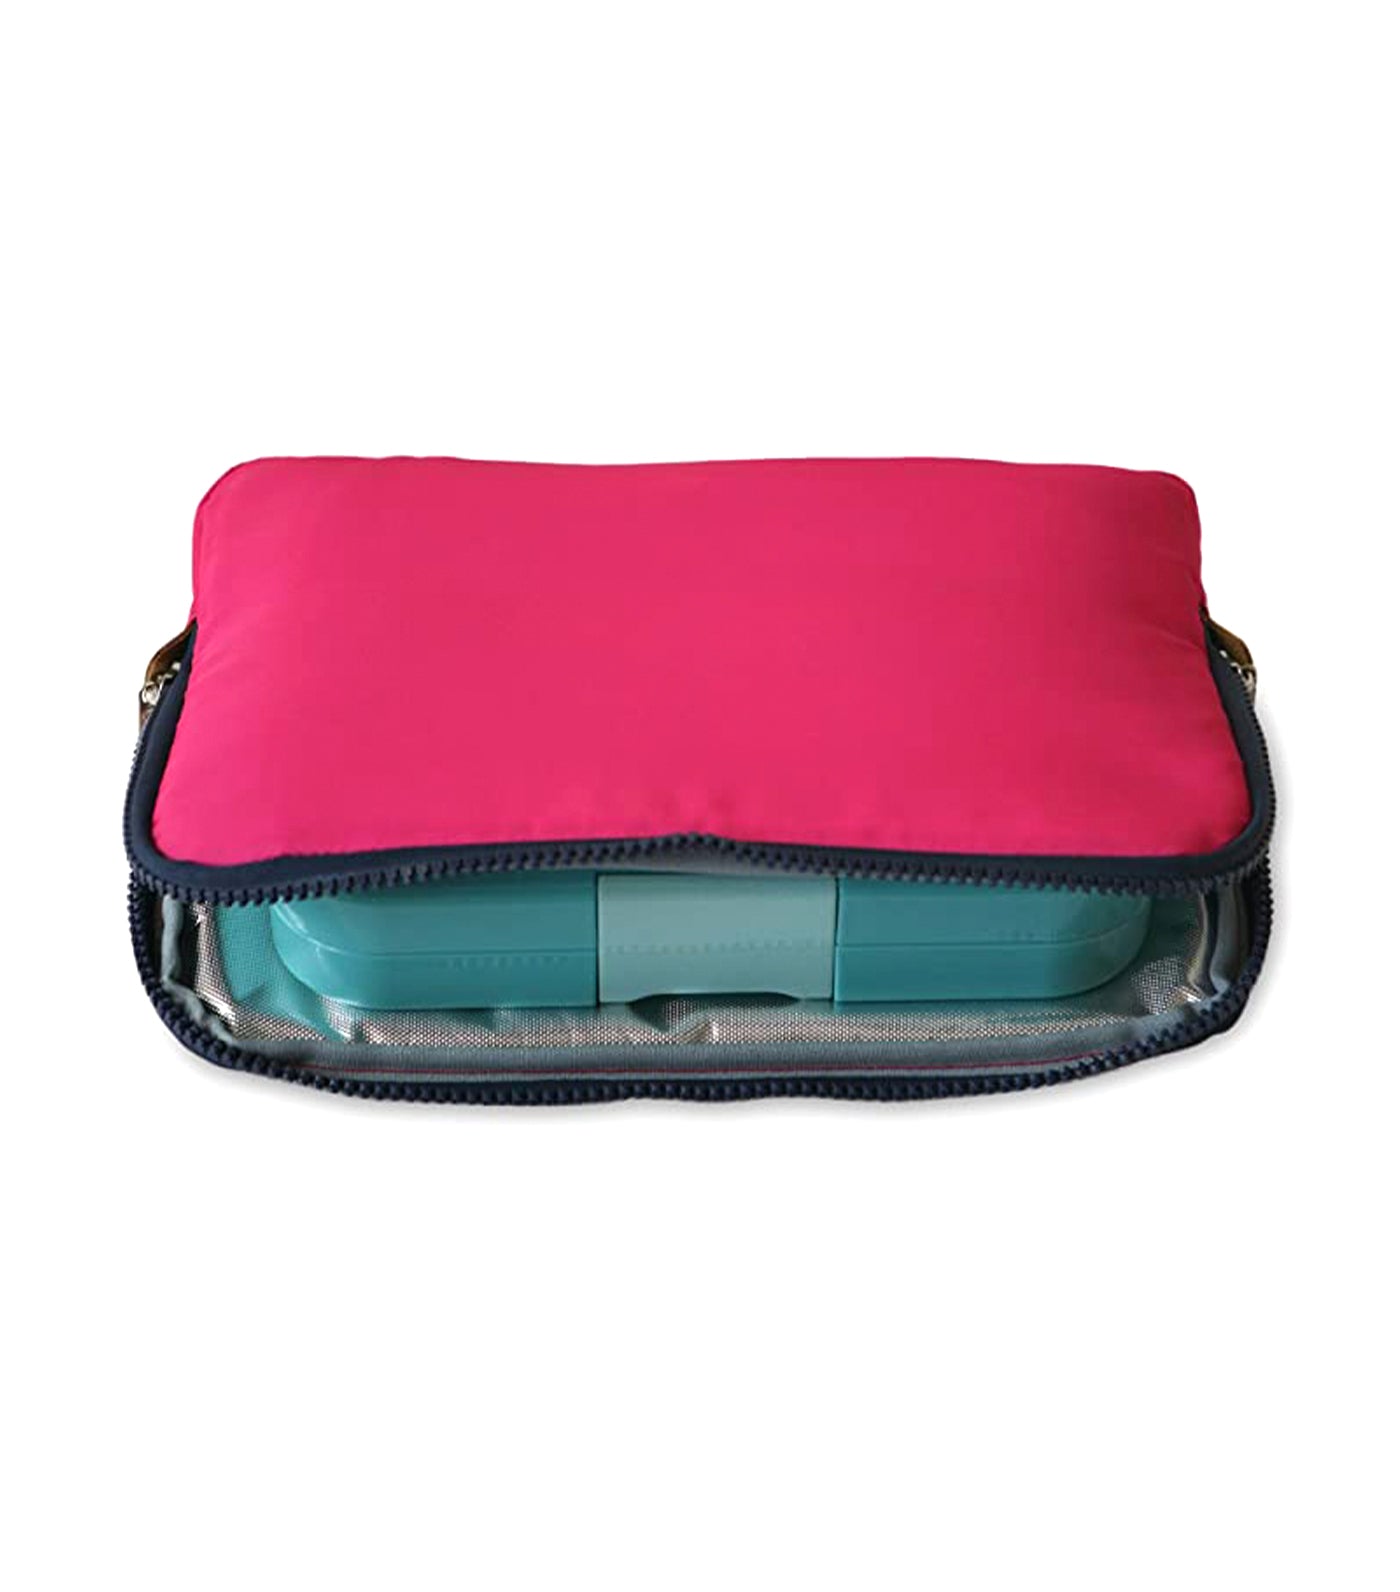 yumbox poche insulated sleeve lunch bag - magenta